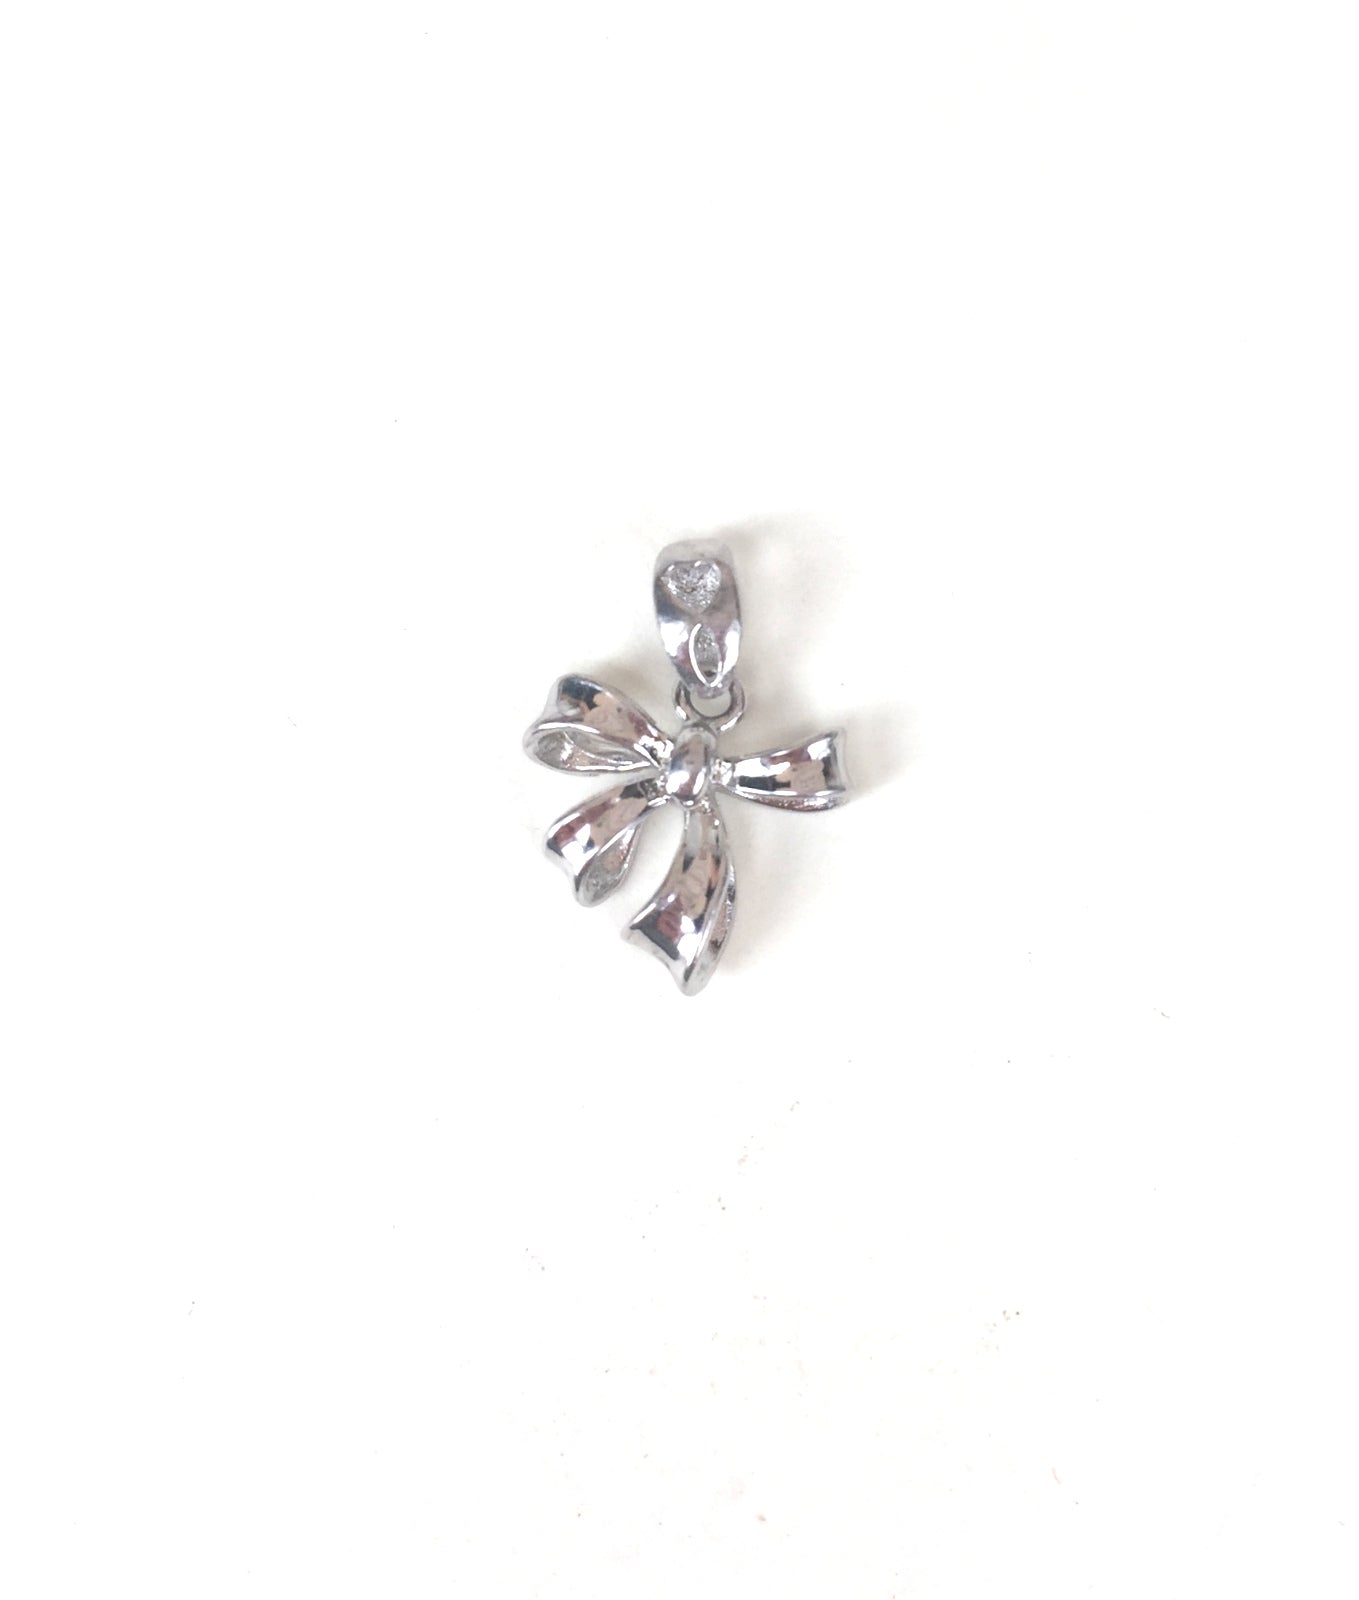 BOW STERLING SILVER PENDANT